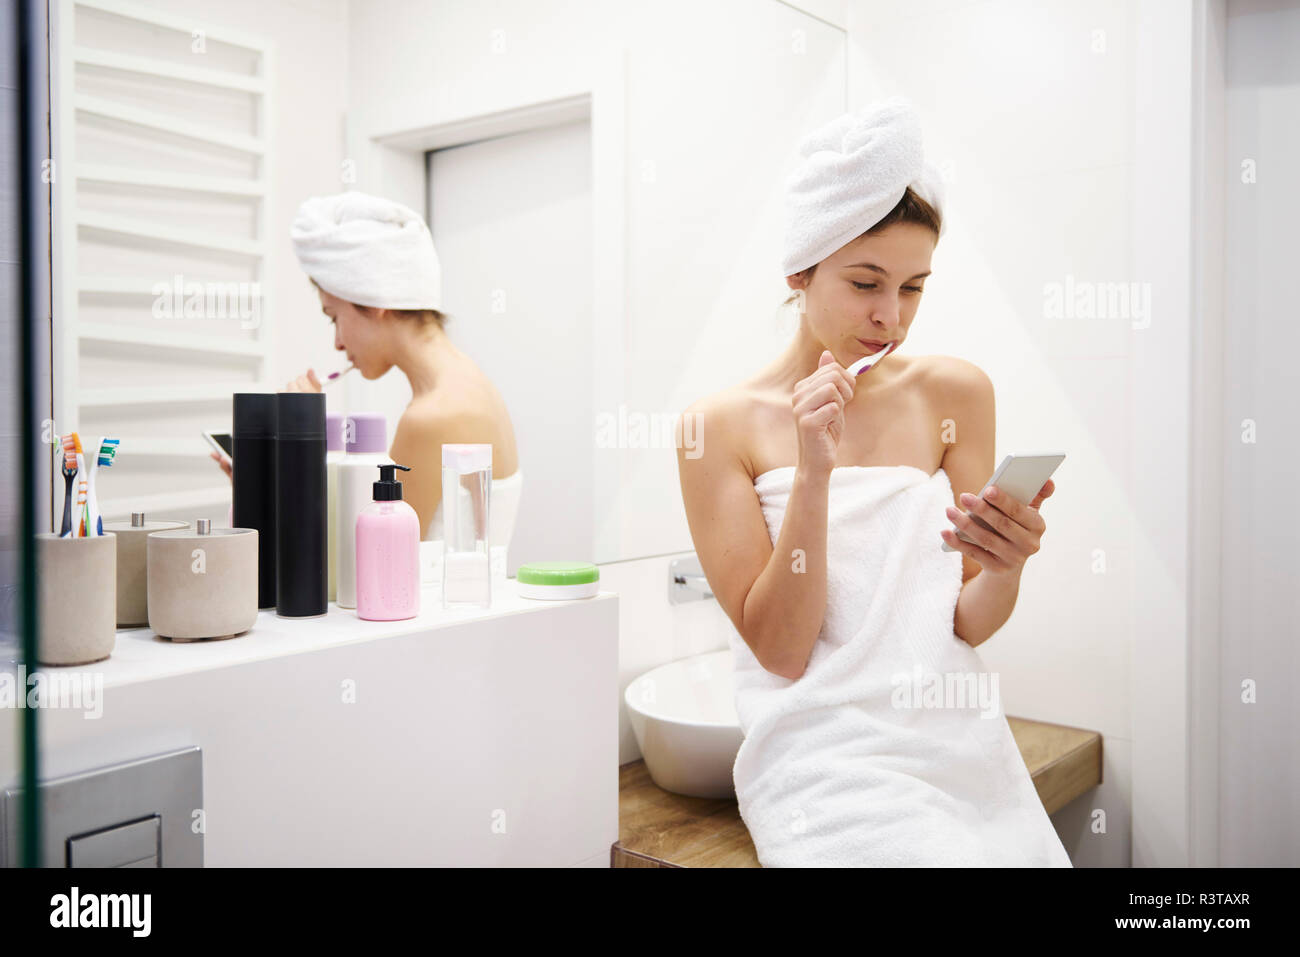 Young woman in bathroom brushing her teeth while reading messages on mobile phone Stock Photo